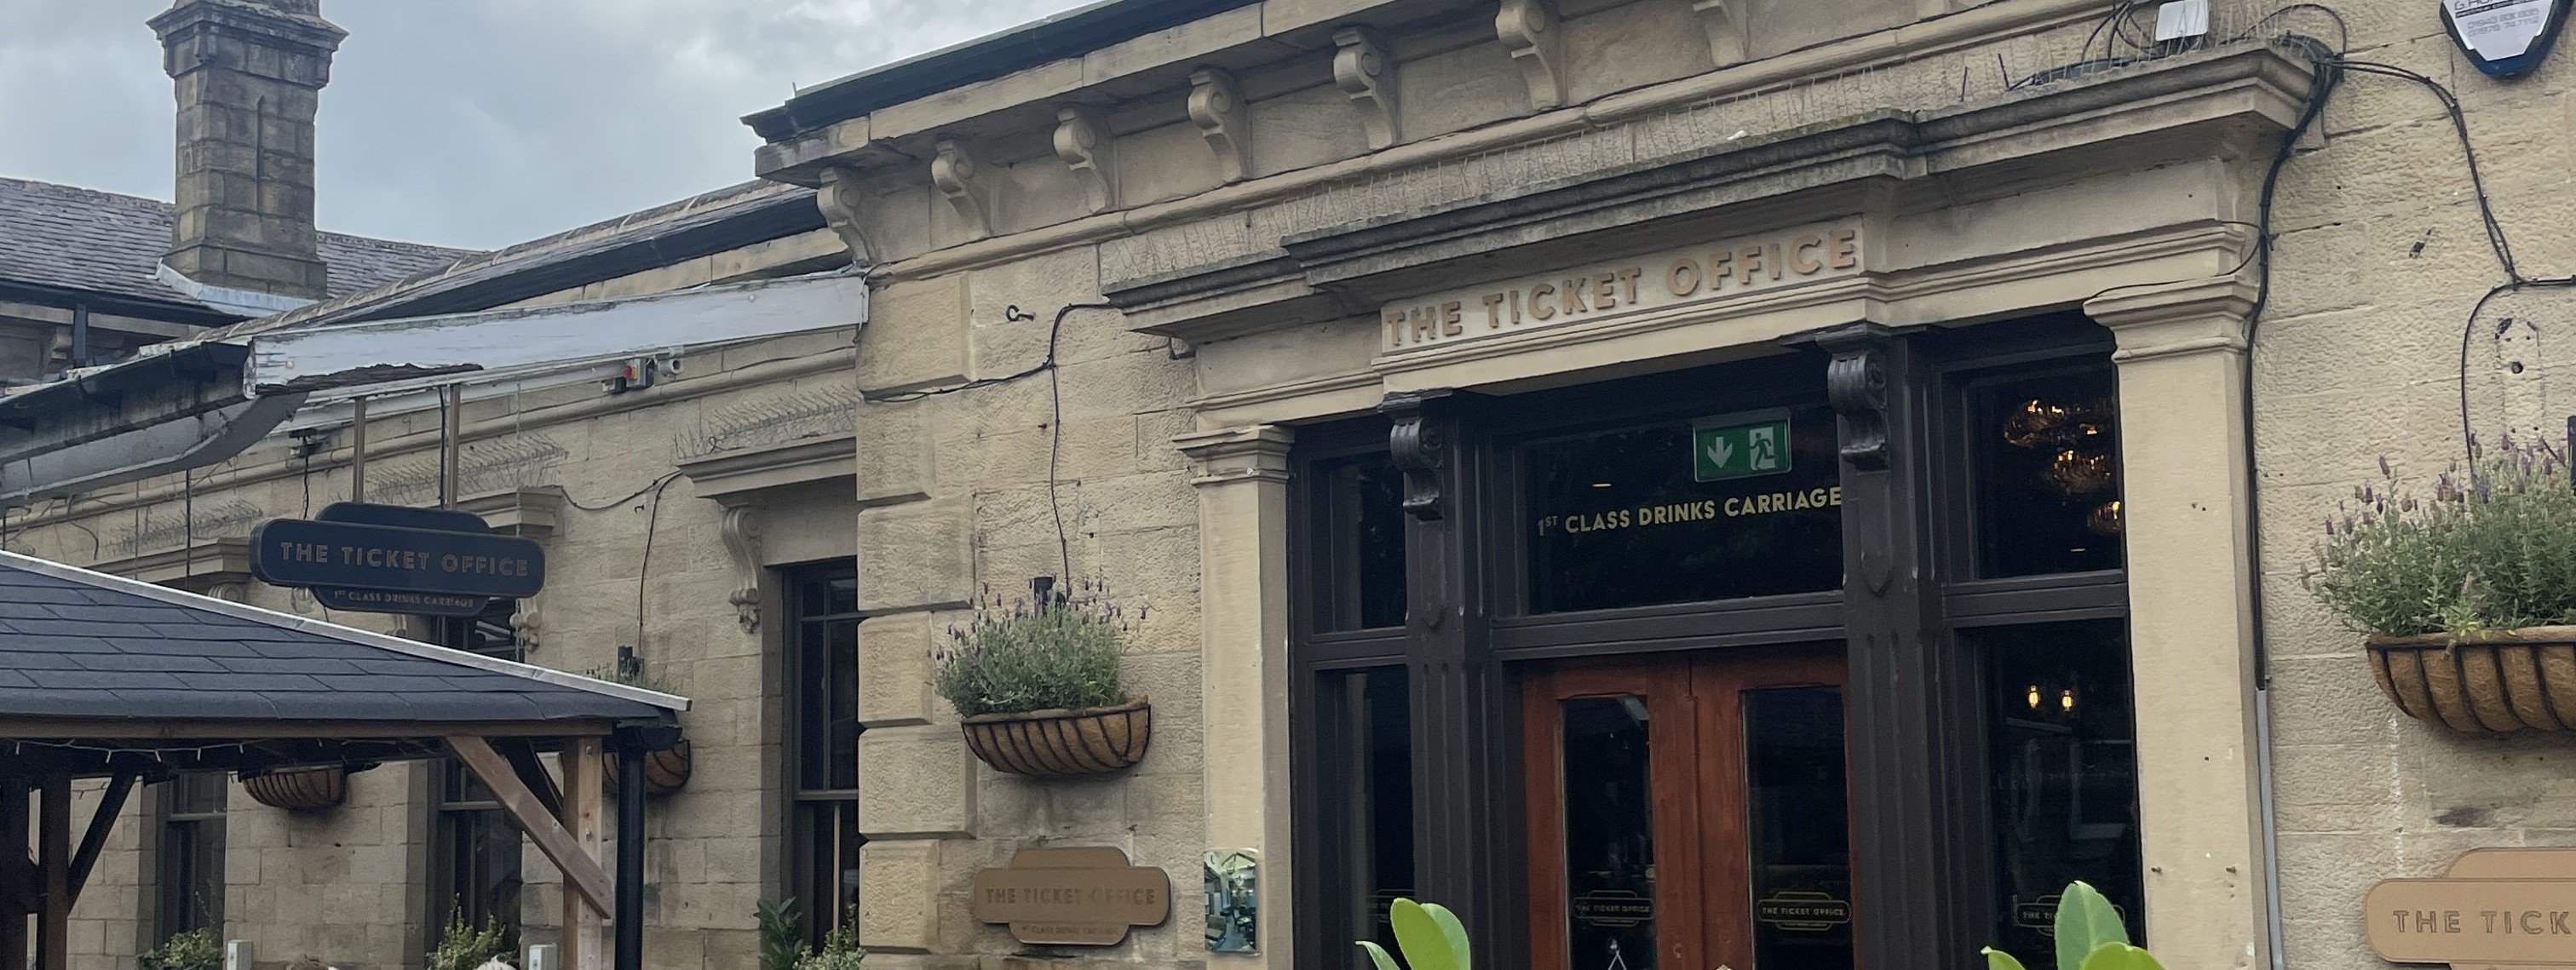 this-image-shows-the-ticket-office-pub-at-ilkley